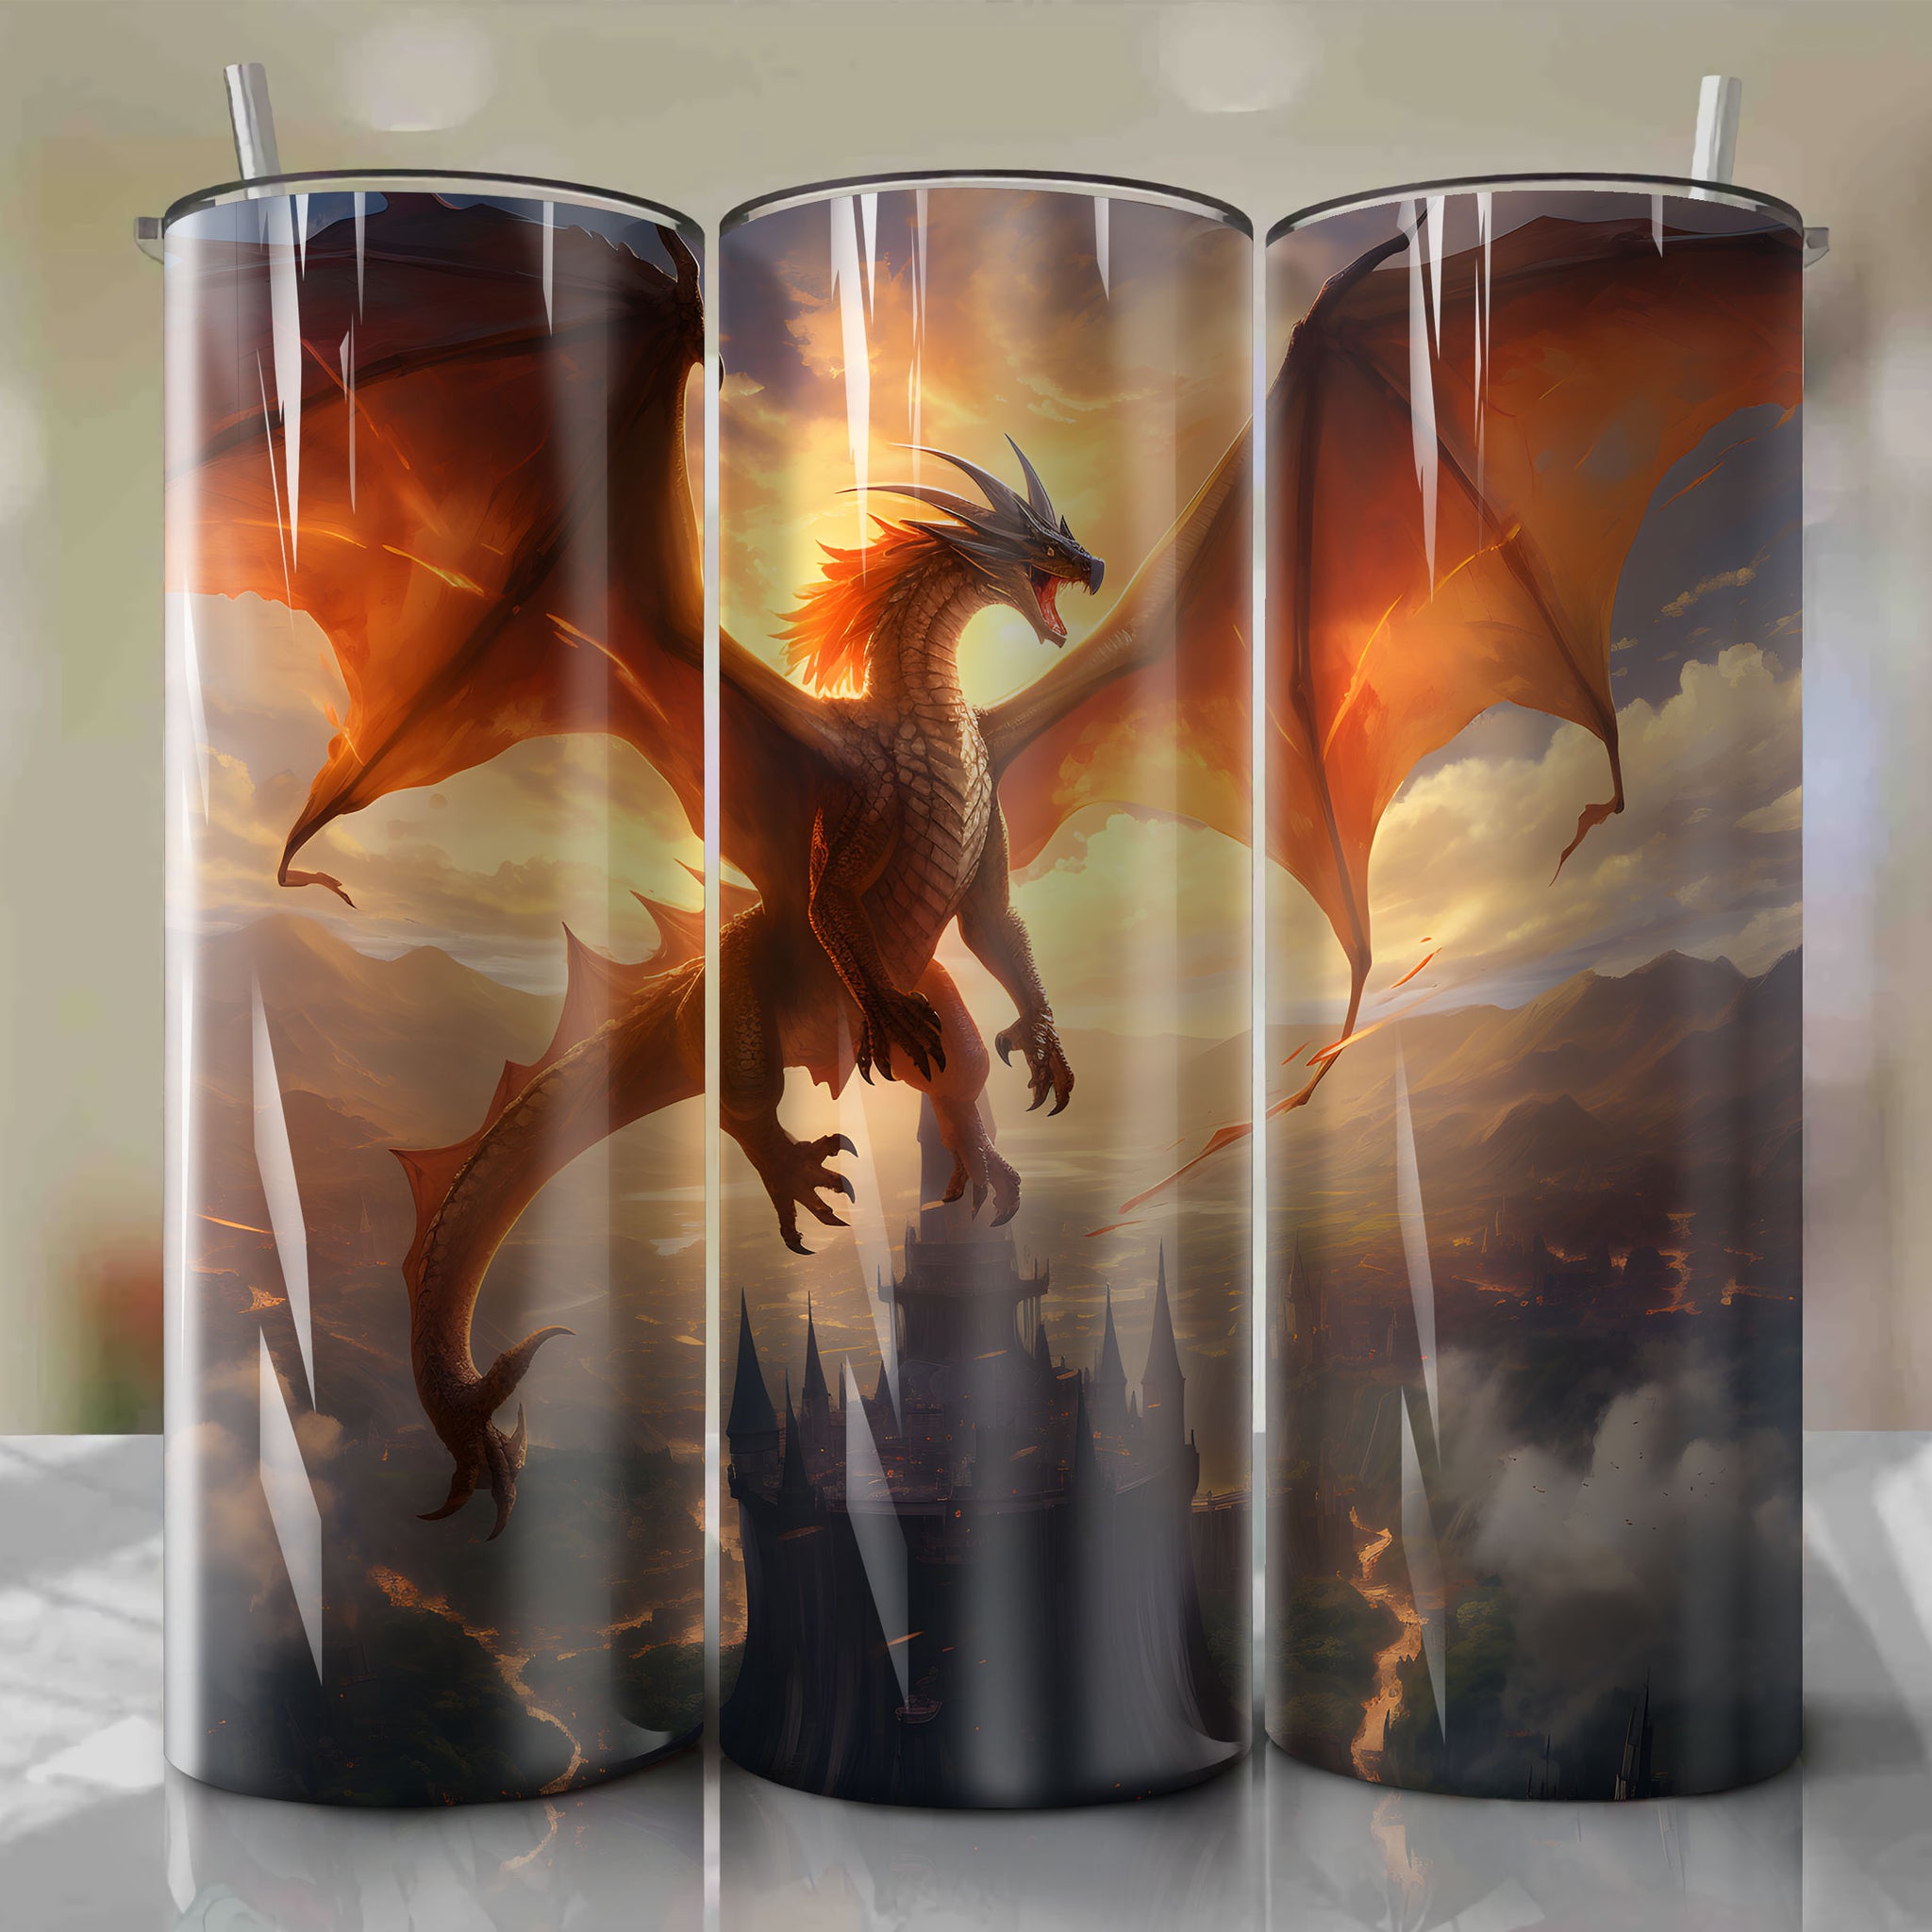 20 Oz Tumbler Wrap - A Stunning Artwork Inspired by Charizard
